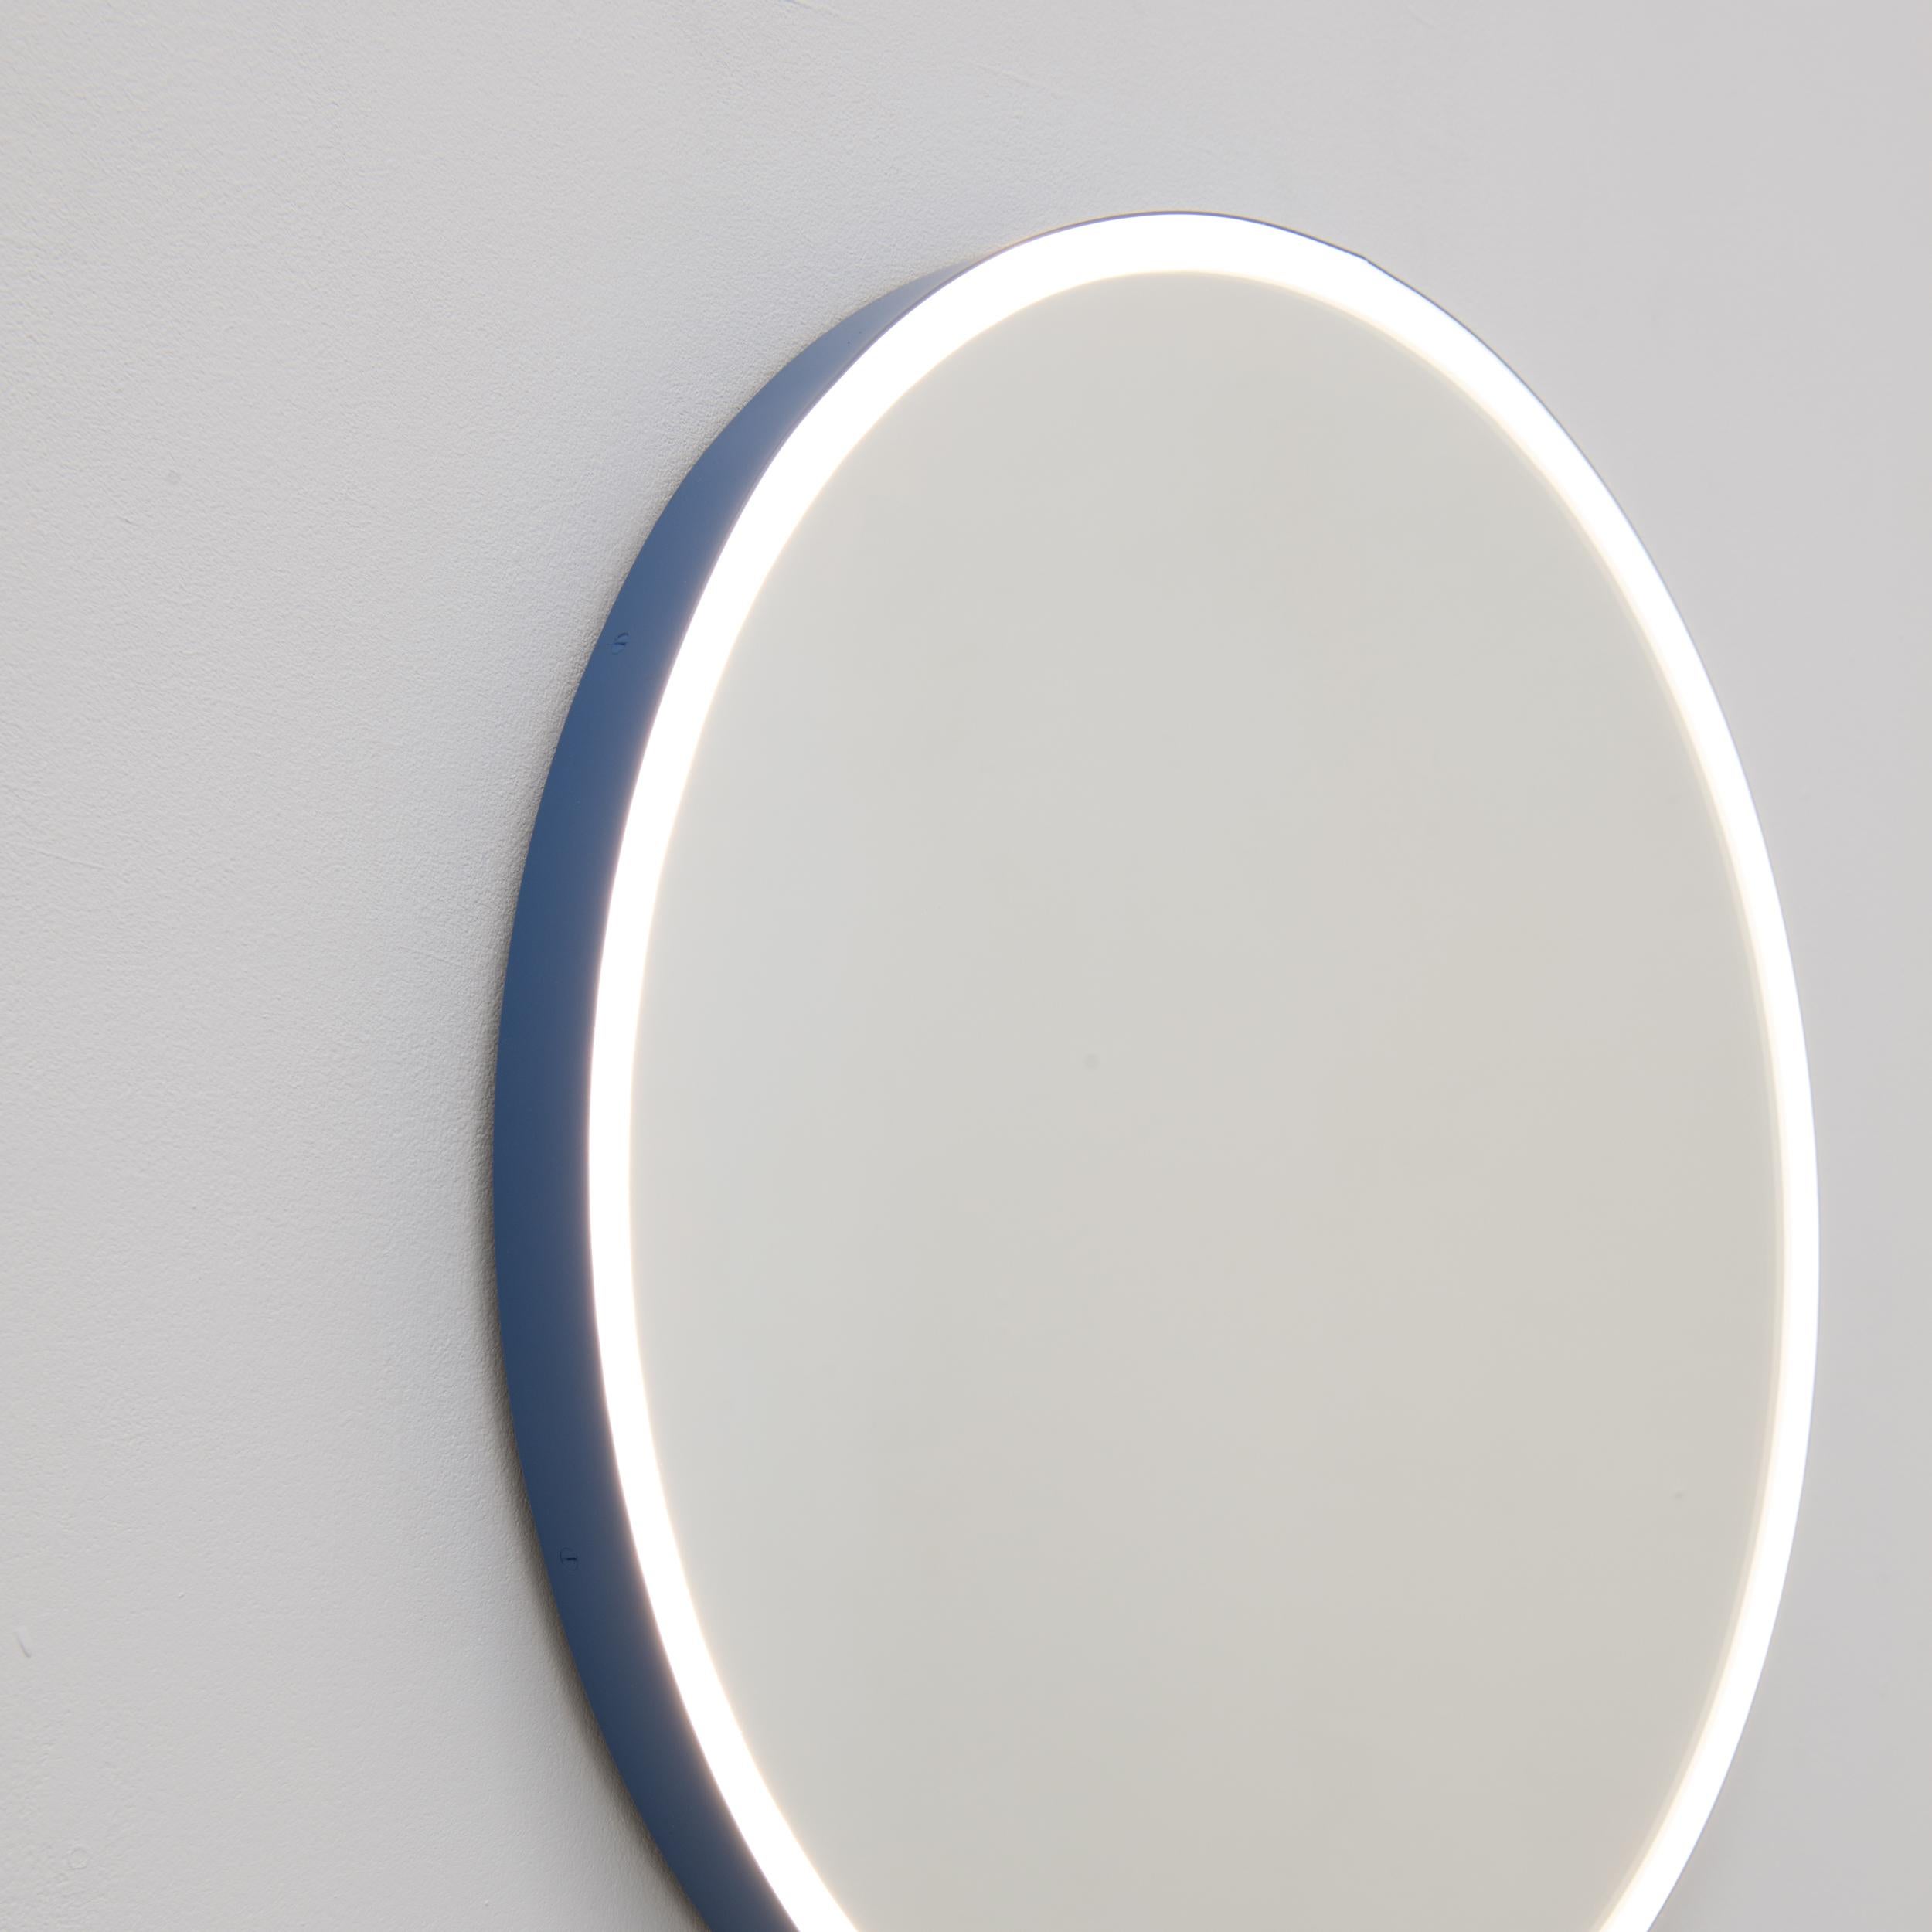 Orbis Front Illuminated Round Contemporary Mirror with Blue Frame, Medium For Sale 1